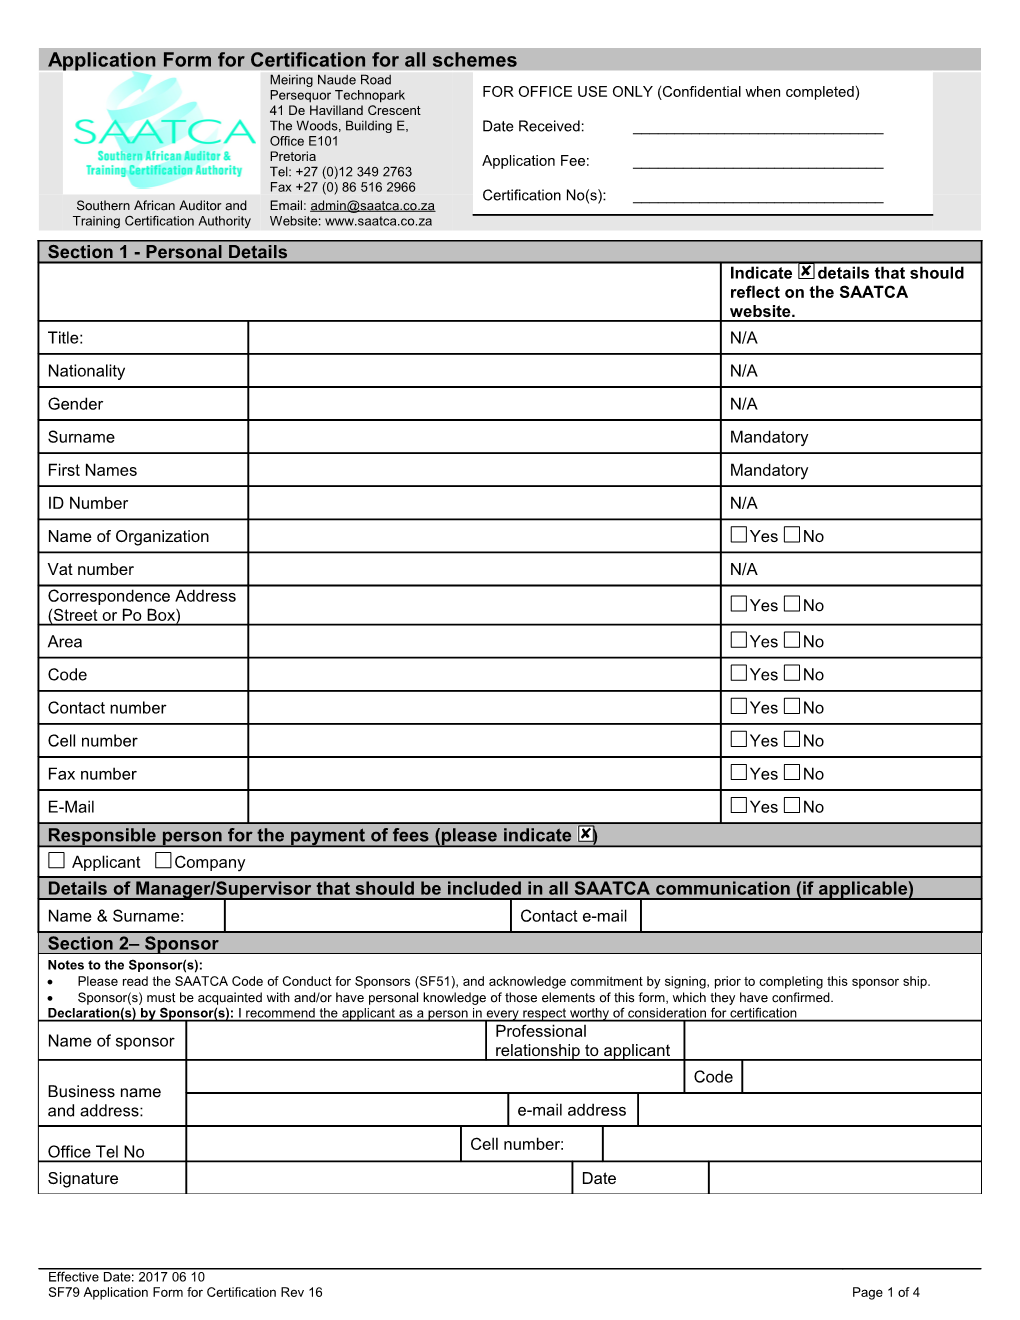 Application Form for Certification